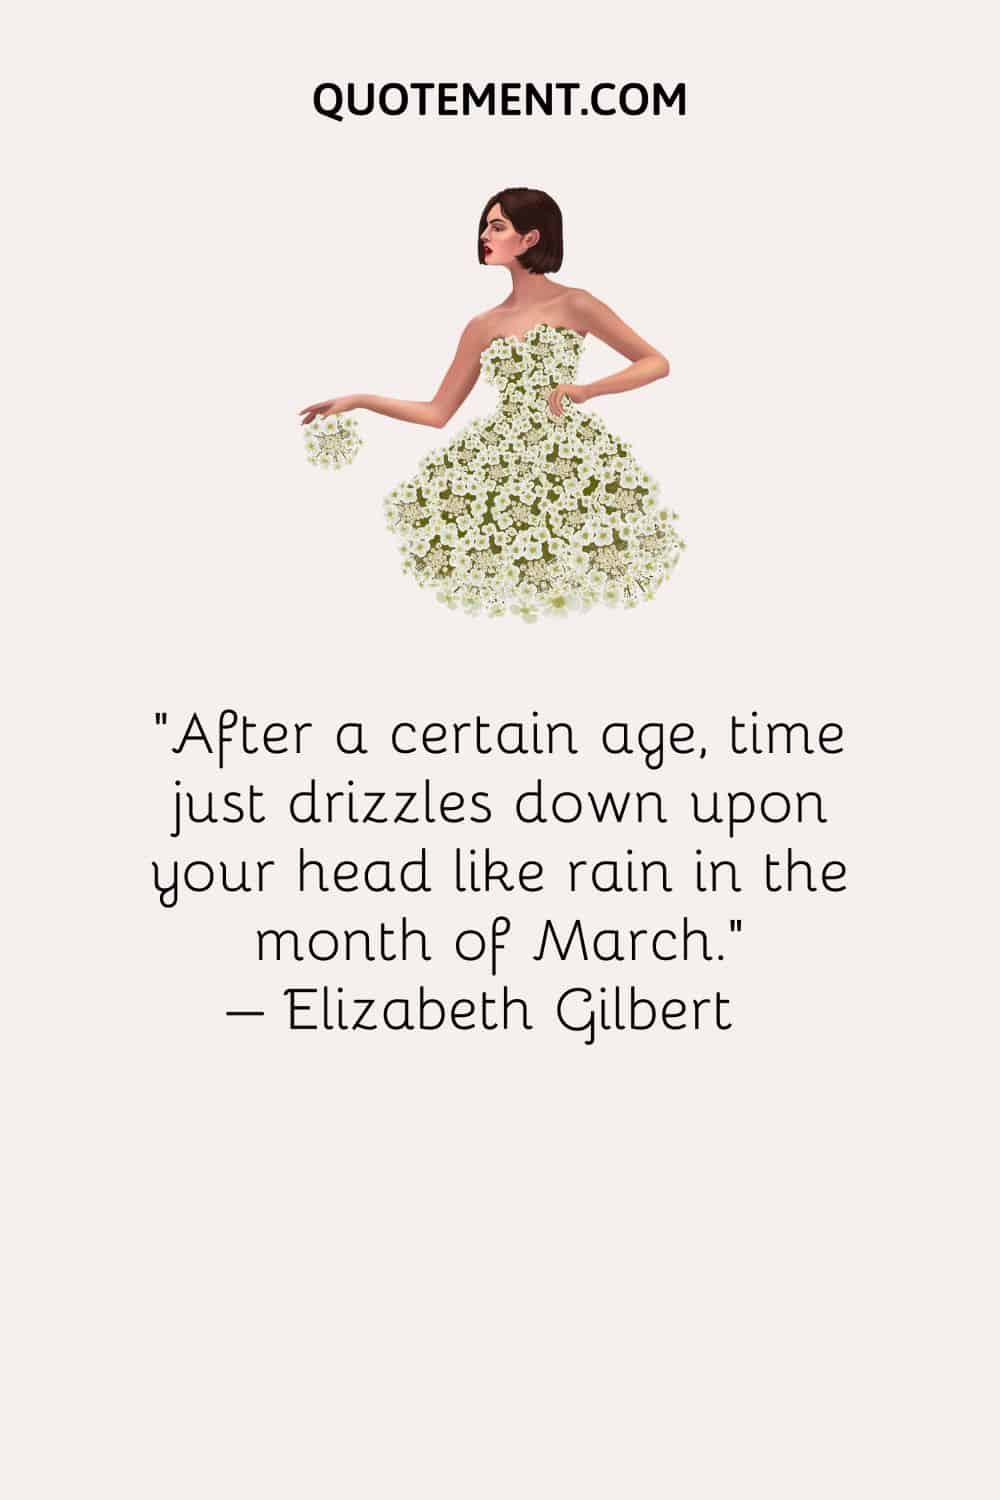 After a certain age, time just drizzles down upon your head like rain in the month of March. – Elizabeth Gilbert